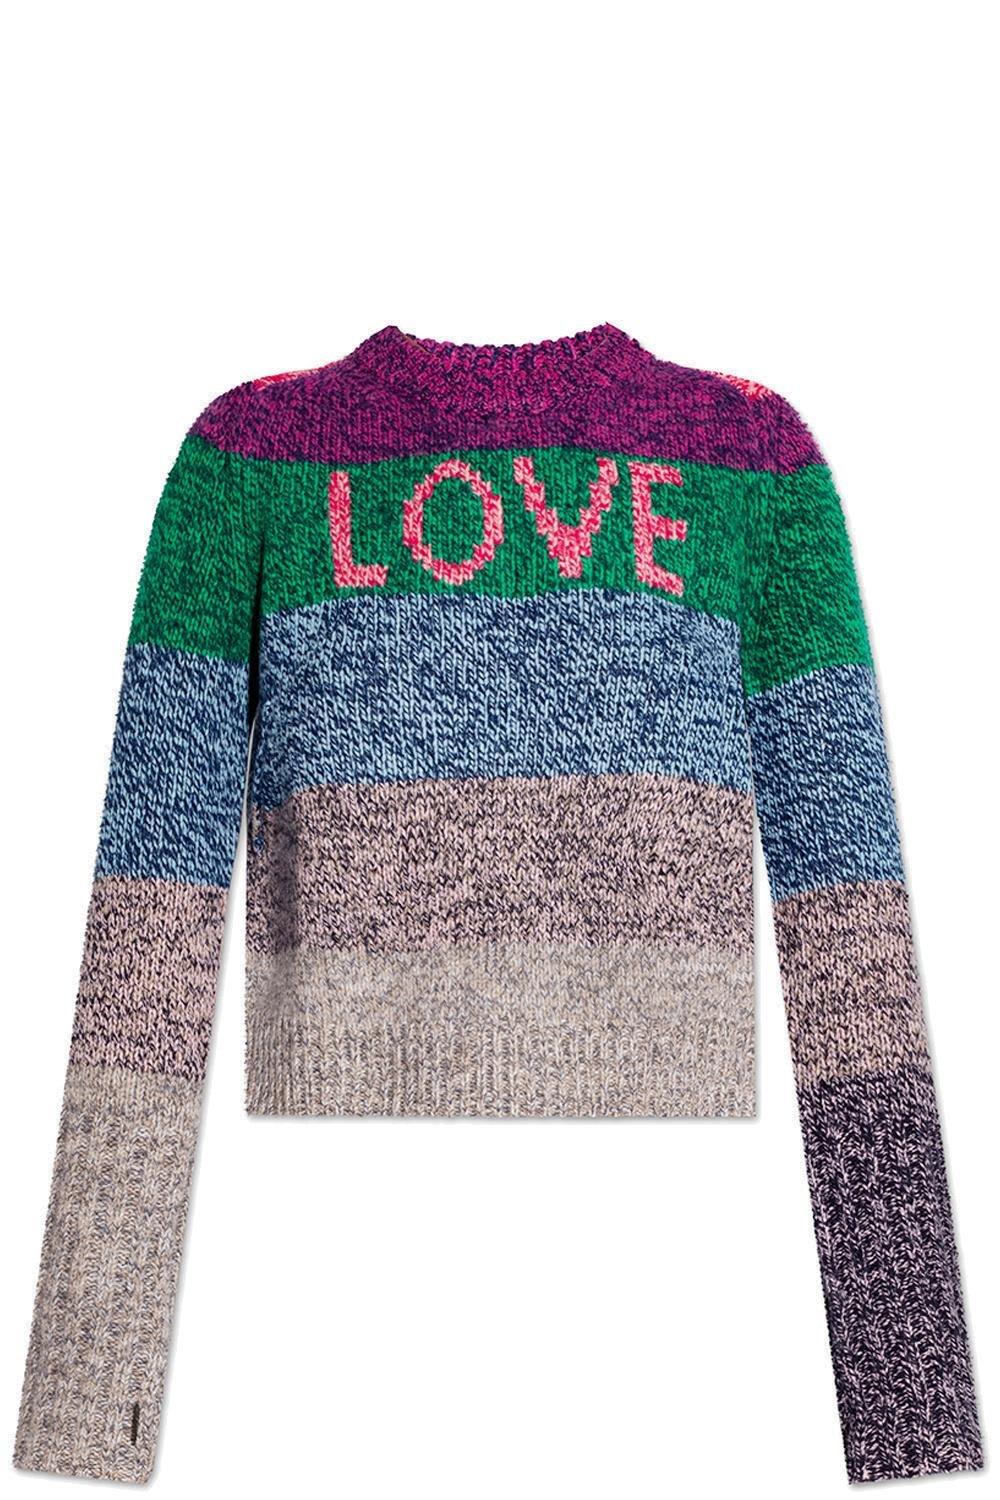 Zadig & Voltaire Intarsia-knitted Crewneck Jumper